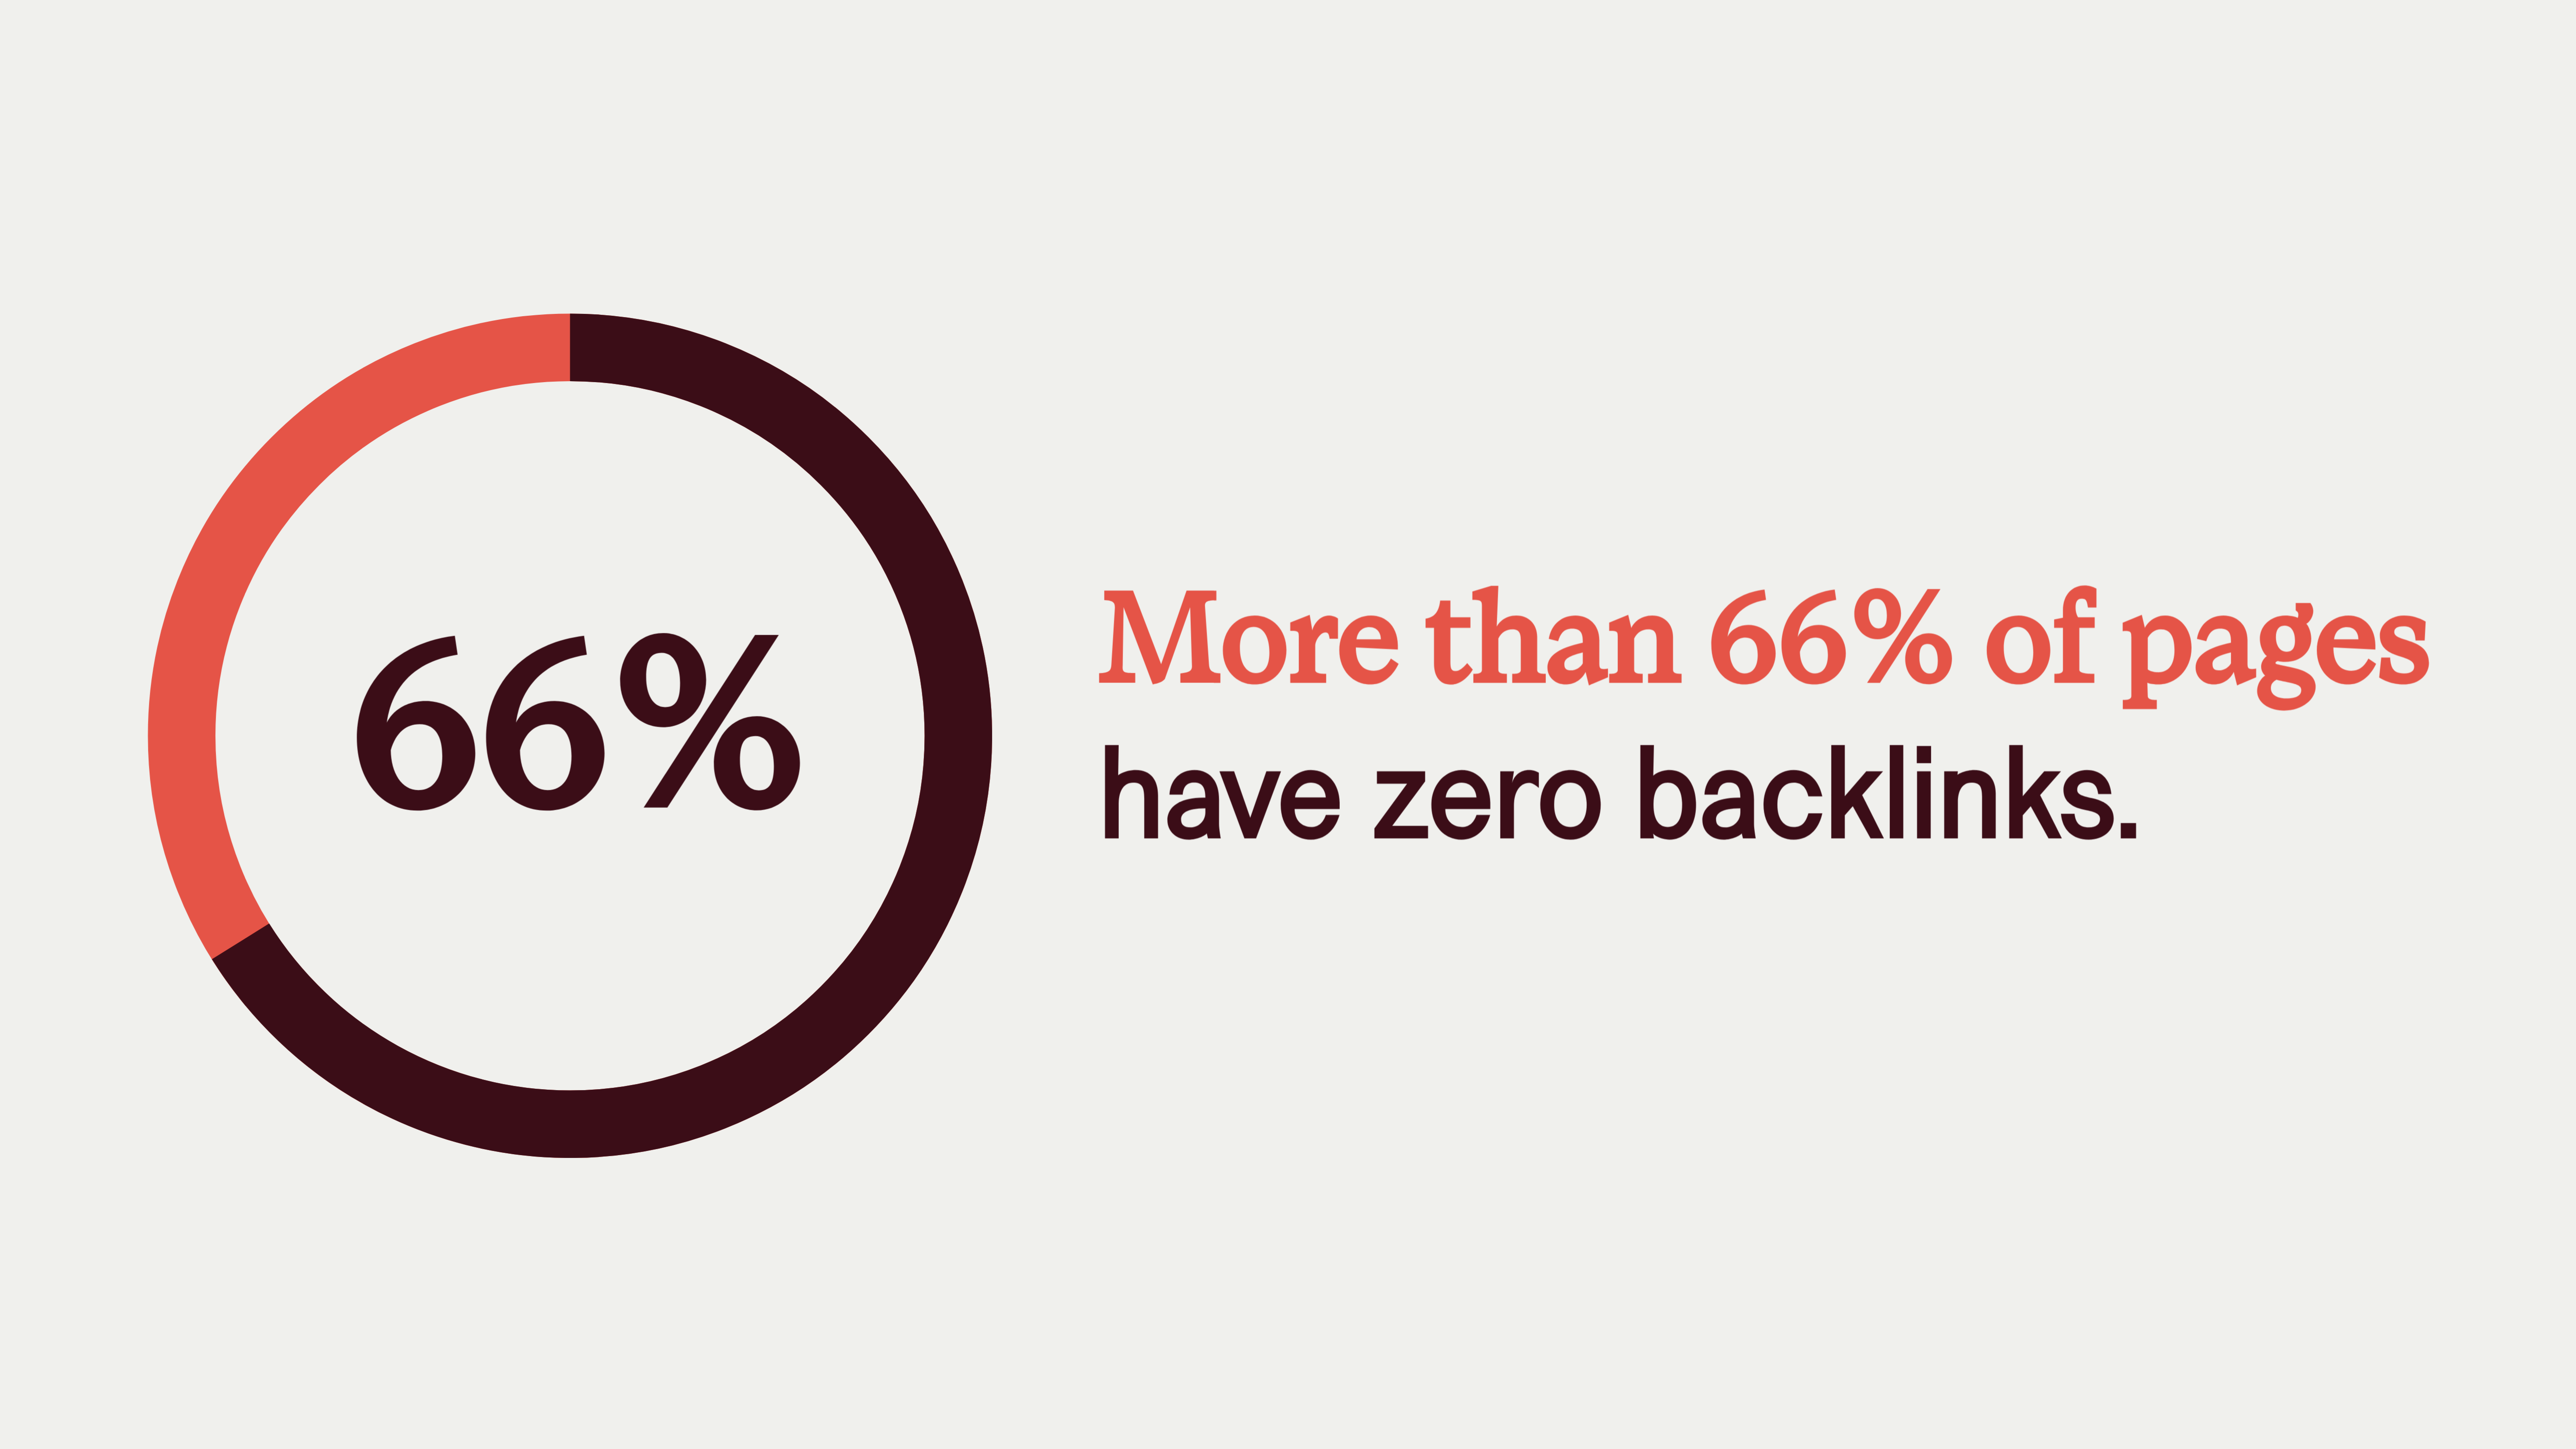 Text stat reading "More than 66% of pages have zero backlinks pointing to them (Ahrefs, 2020)"